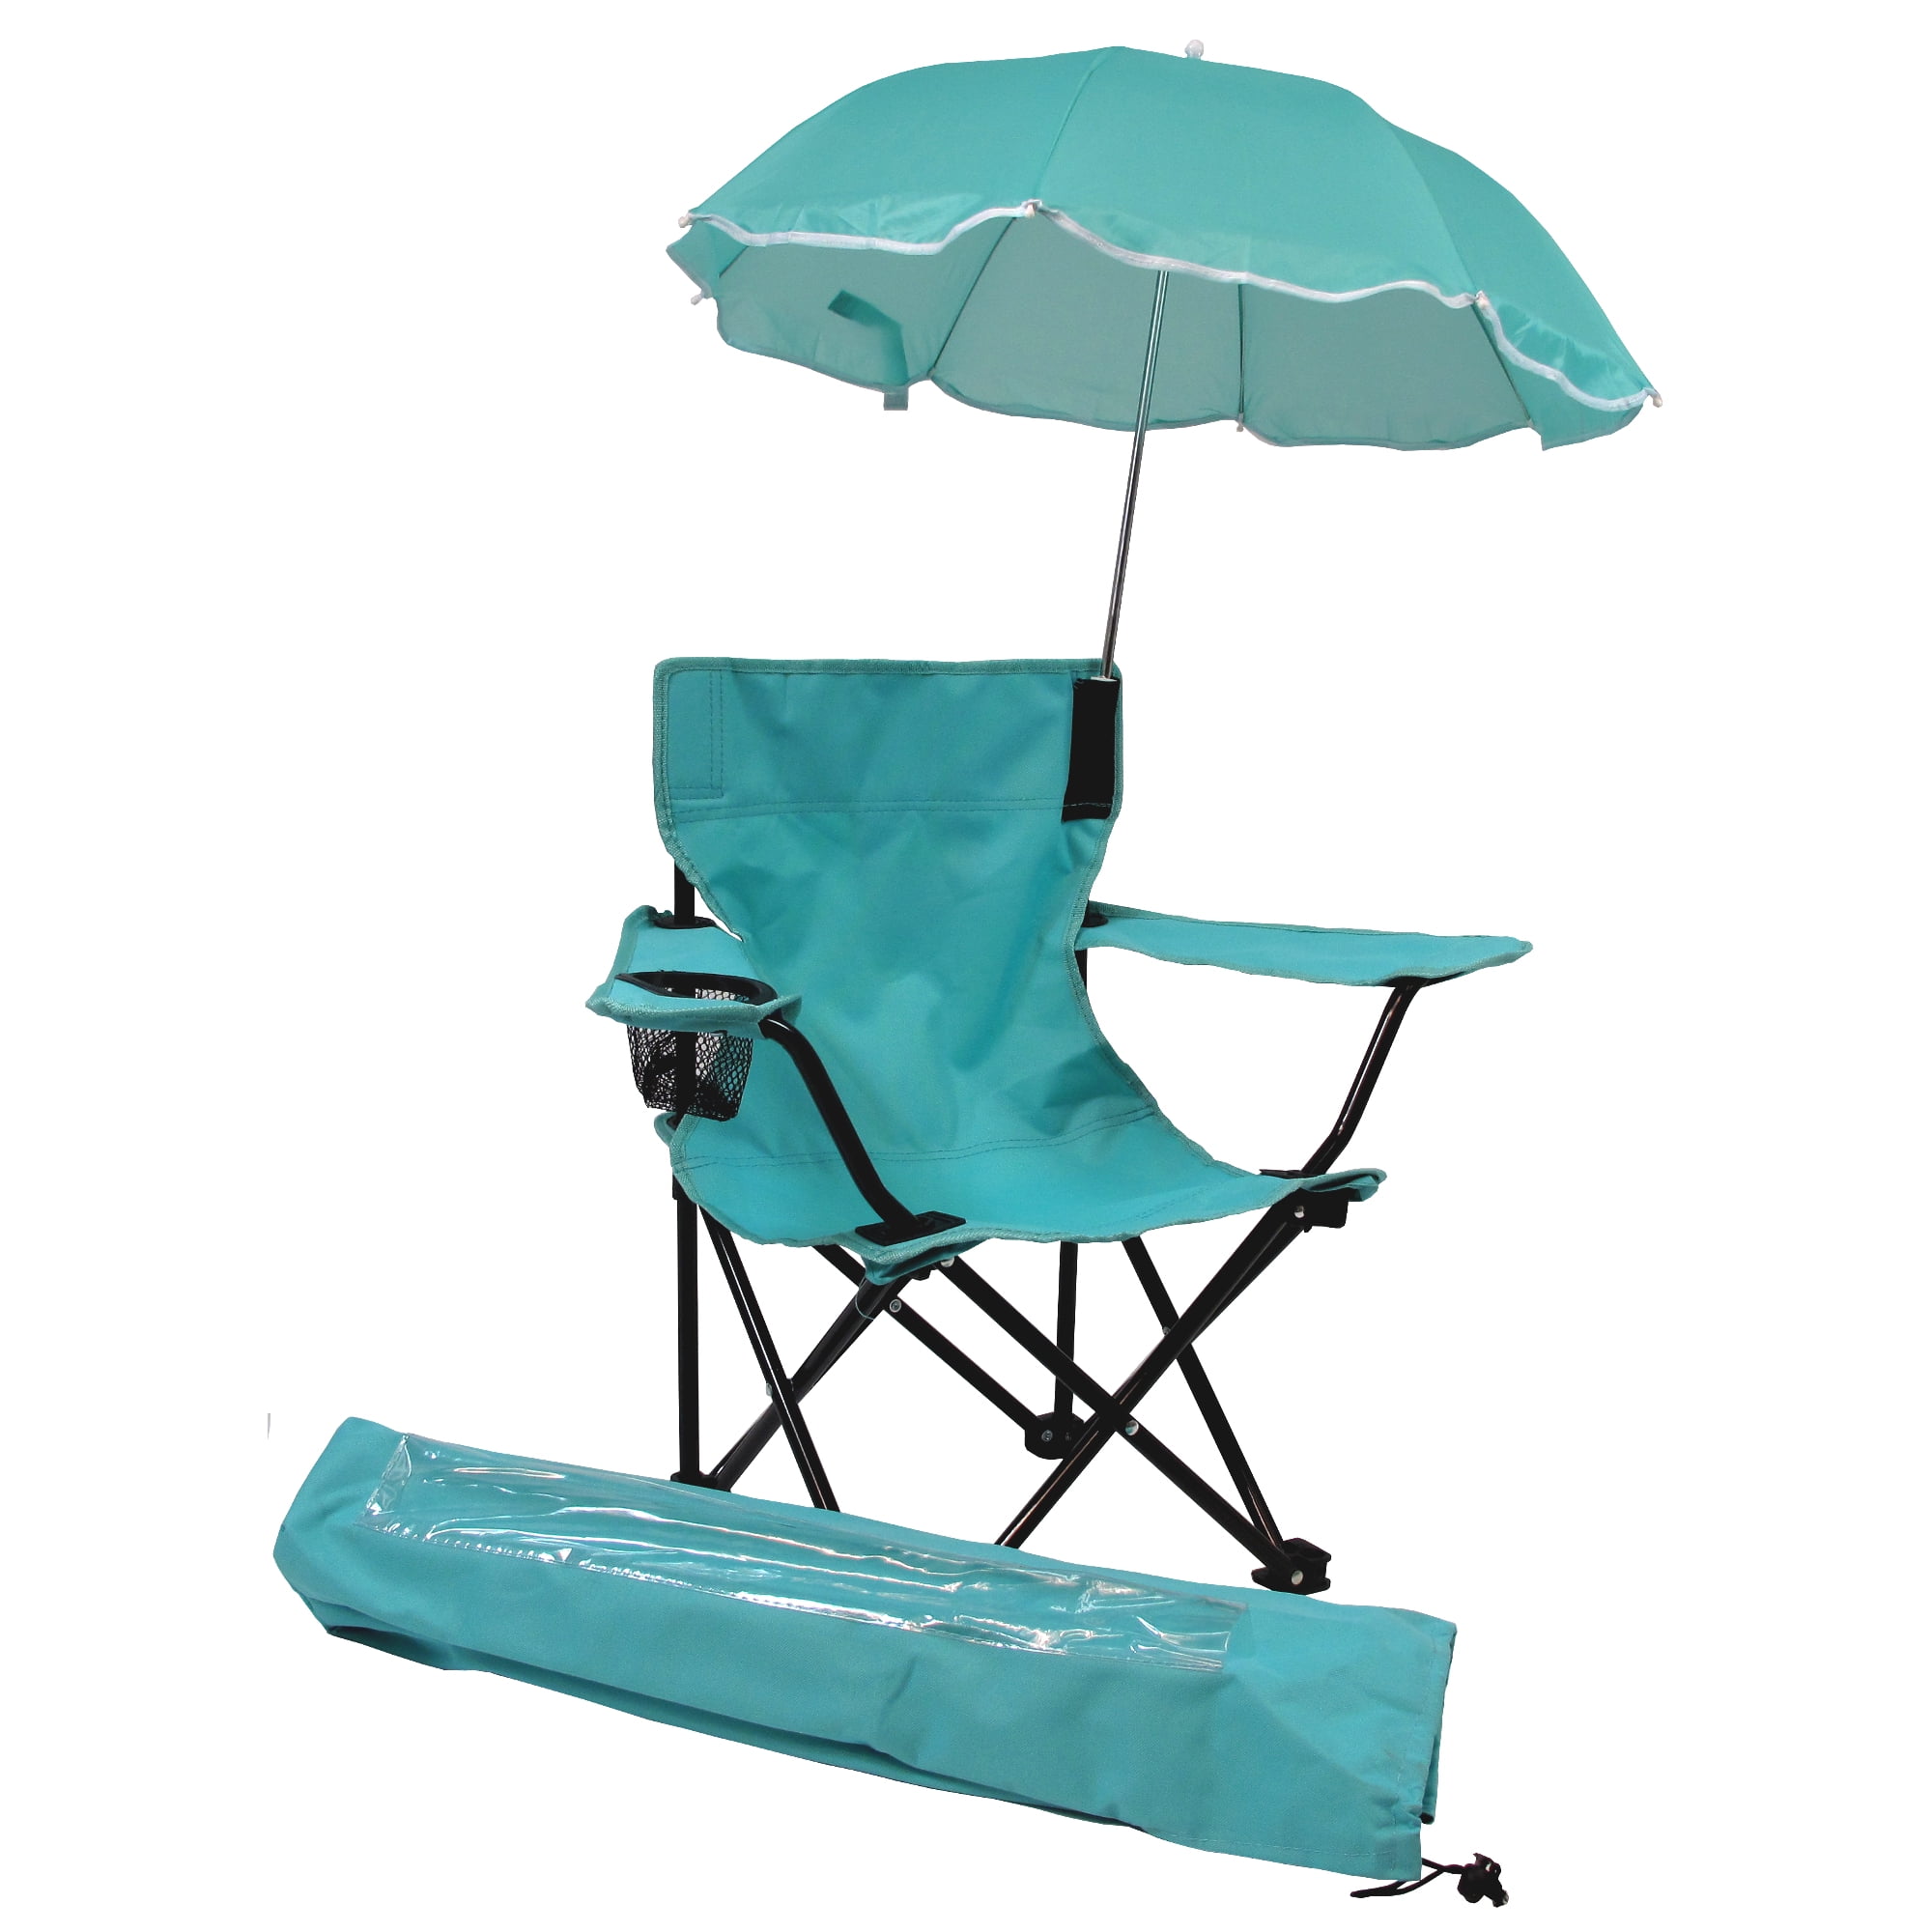 New Big Kids Beach Chair for Simple Design